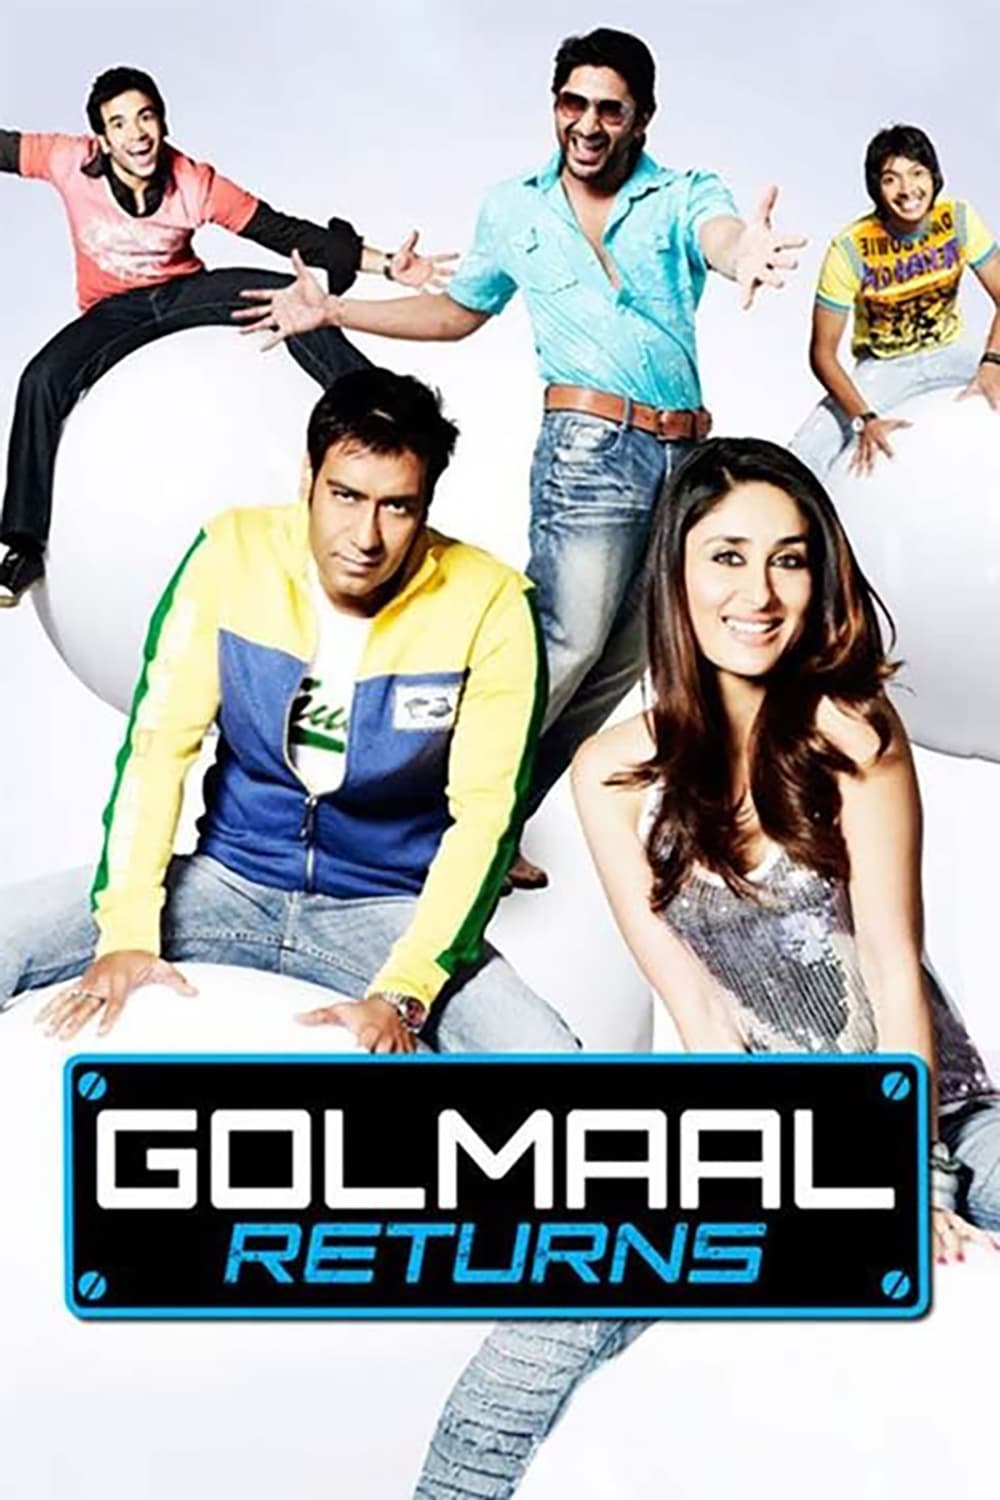 Poster for the movie "Golmaal Returns"